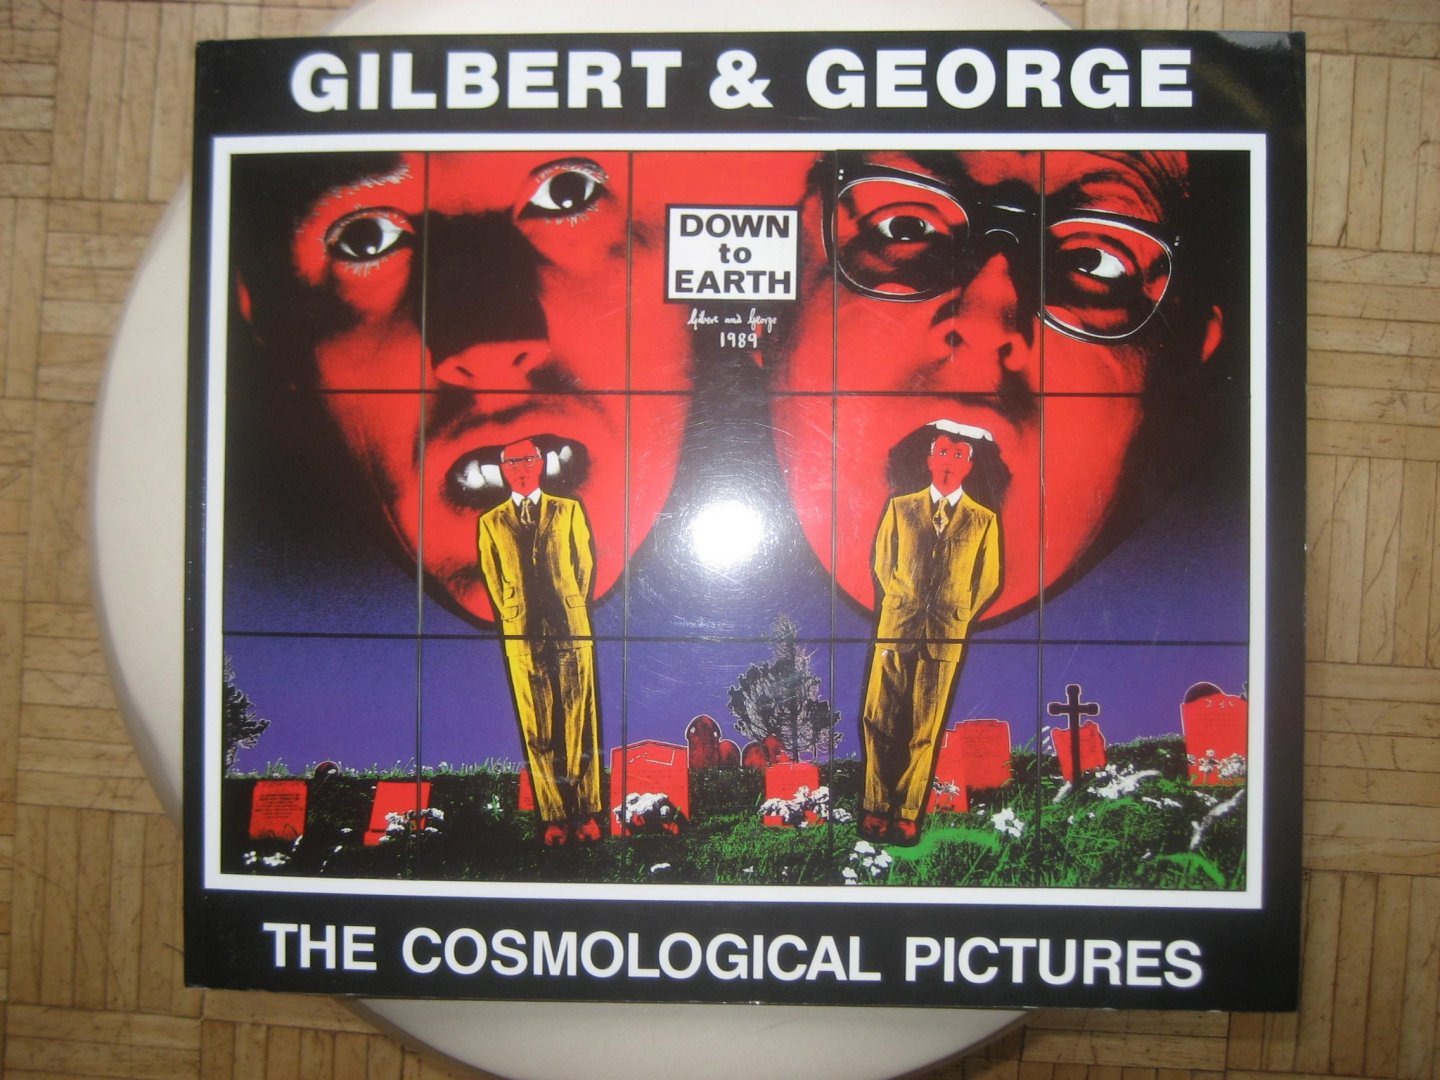 Rudi Fuchs / Gilbert & George - Gilbert & George: The Cosmological Pictures